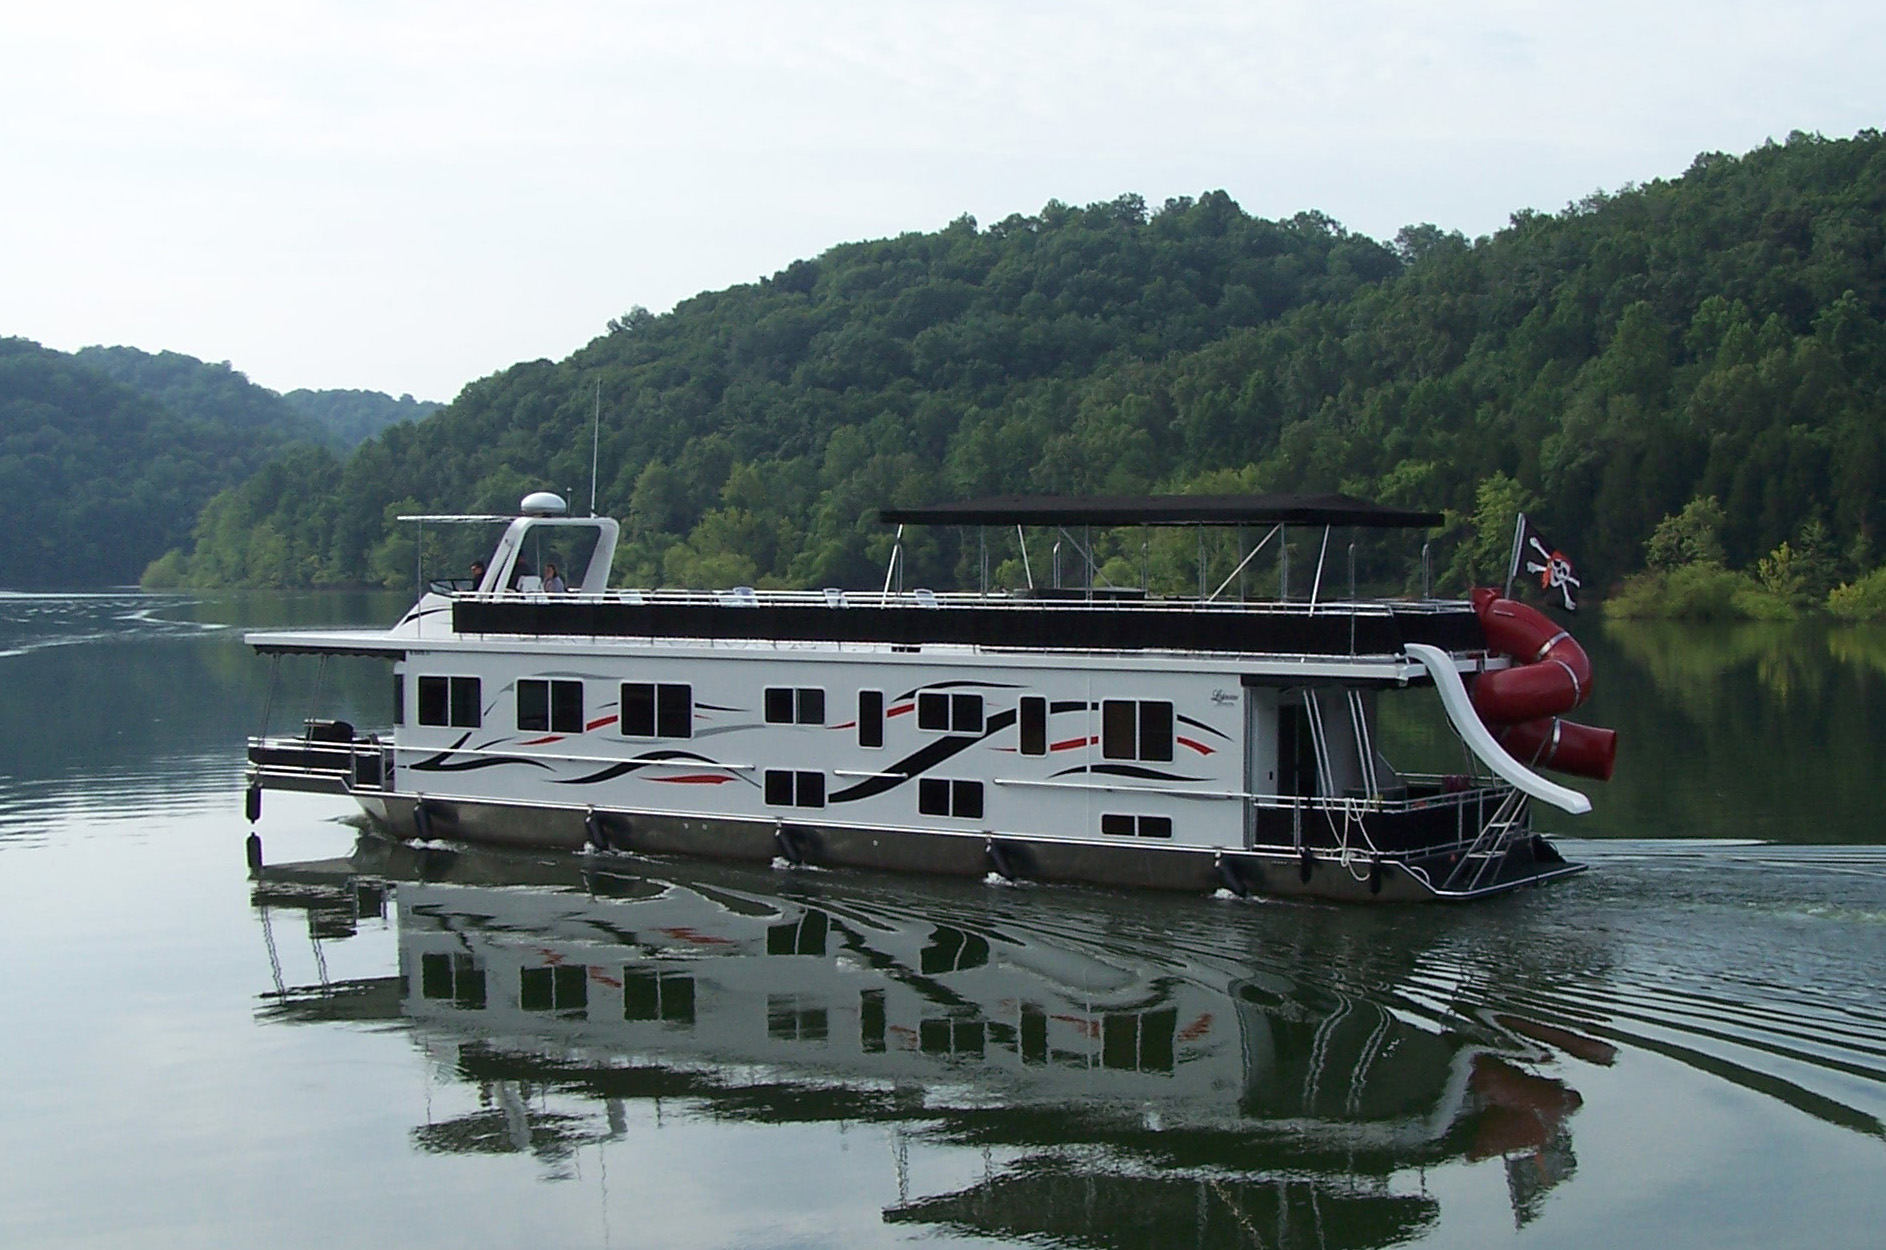 Houseboats For Sale On Dale Hollow Lake : Dale Hollow Lake Houseboats For Sale Dhlviews / I am ...